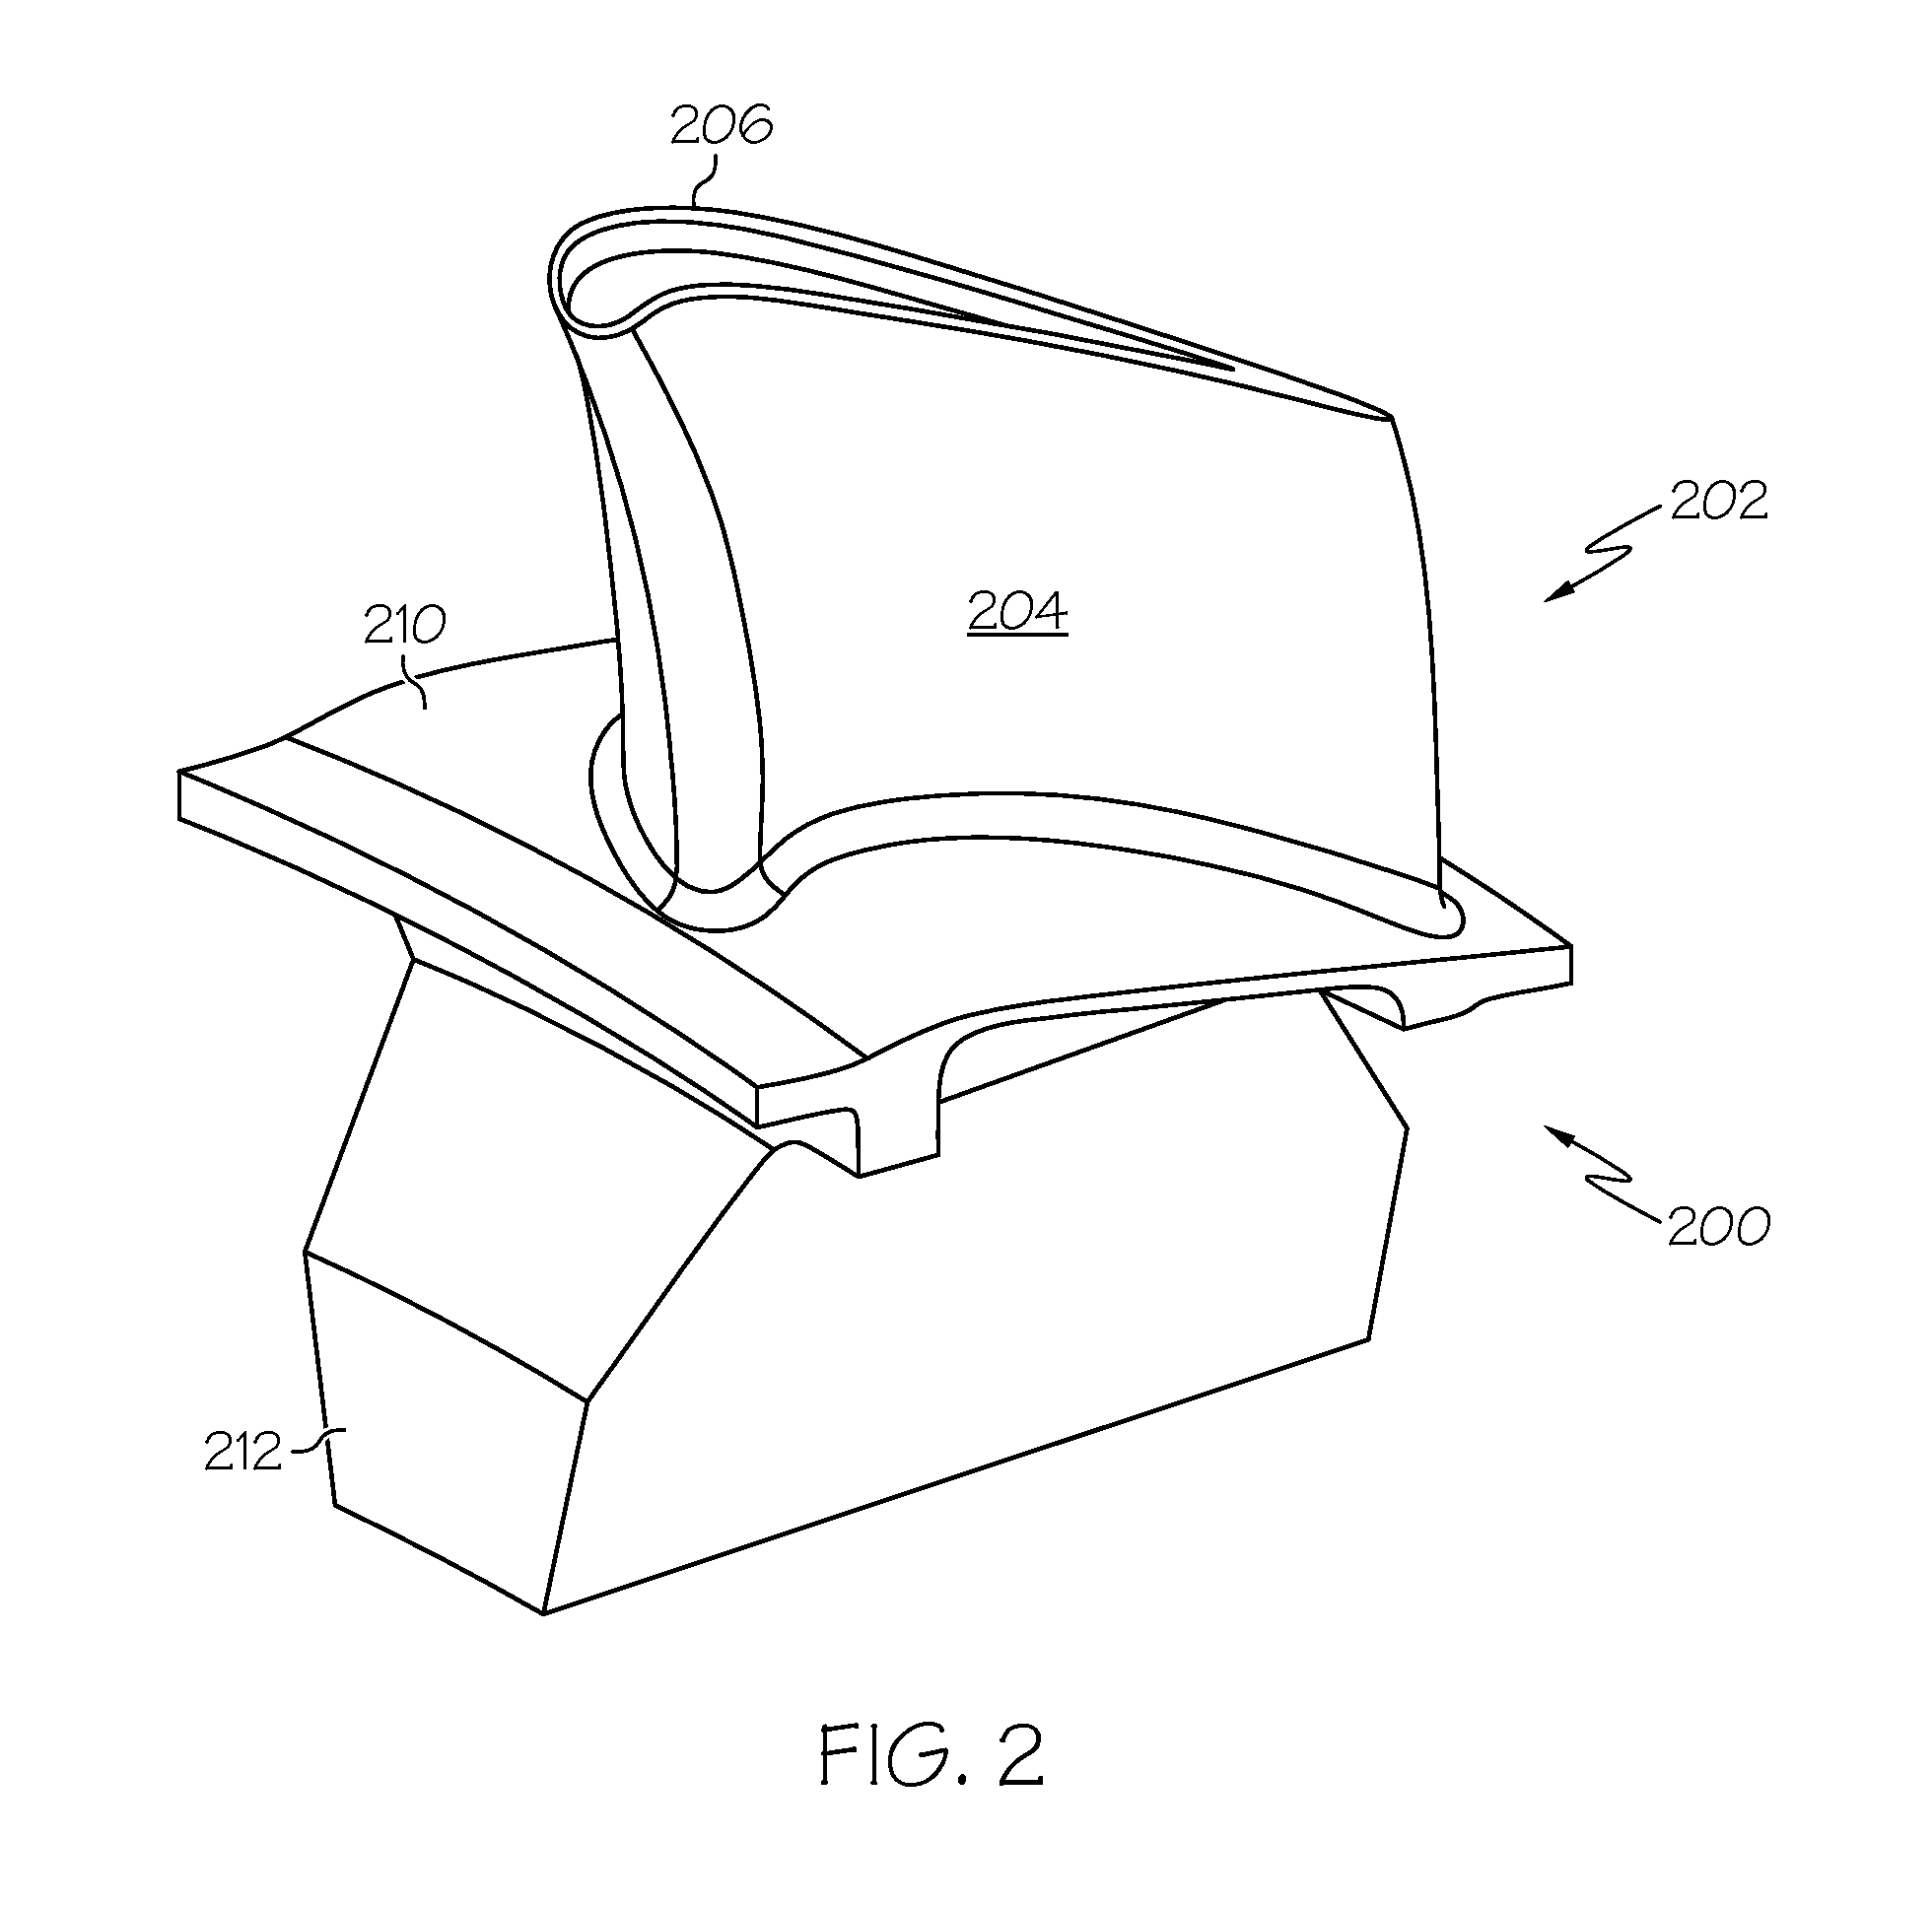 Methods and systems for manufacturing components from articles formed by additive-manufacturing processes